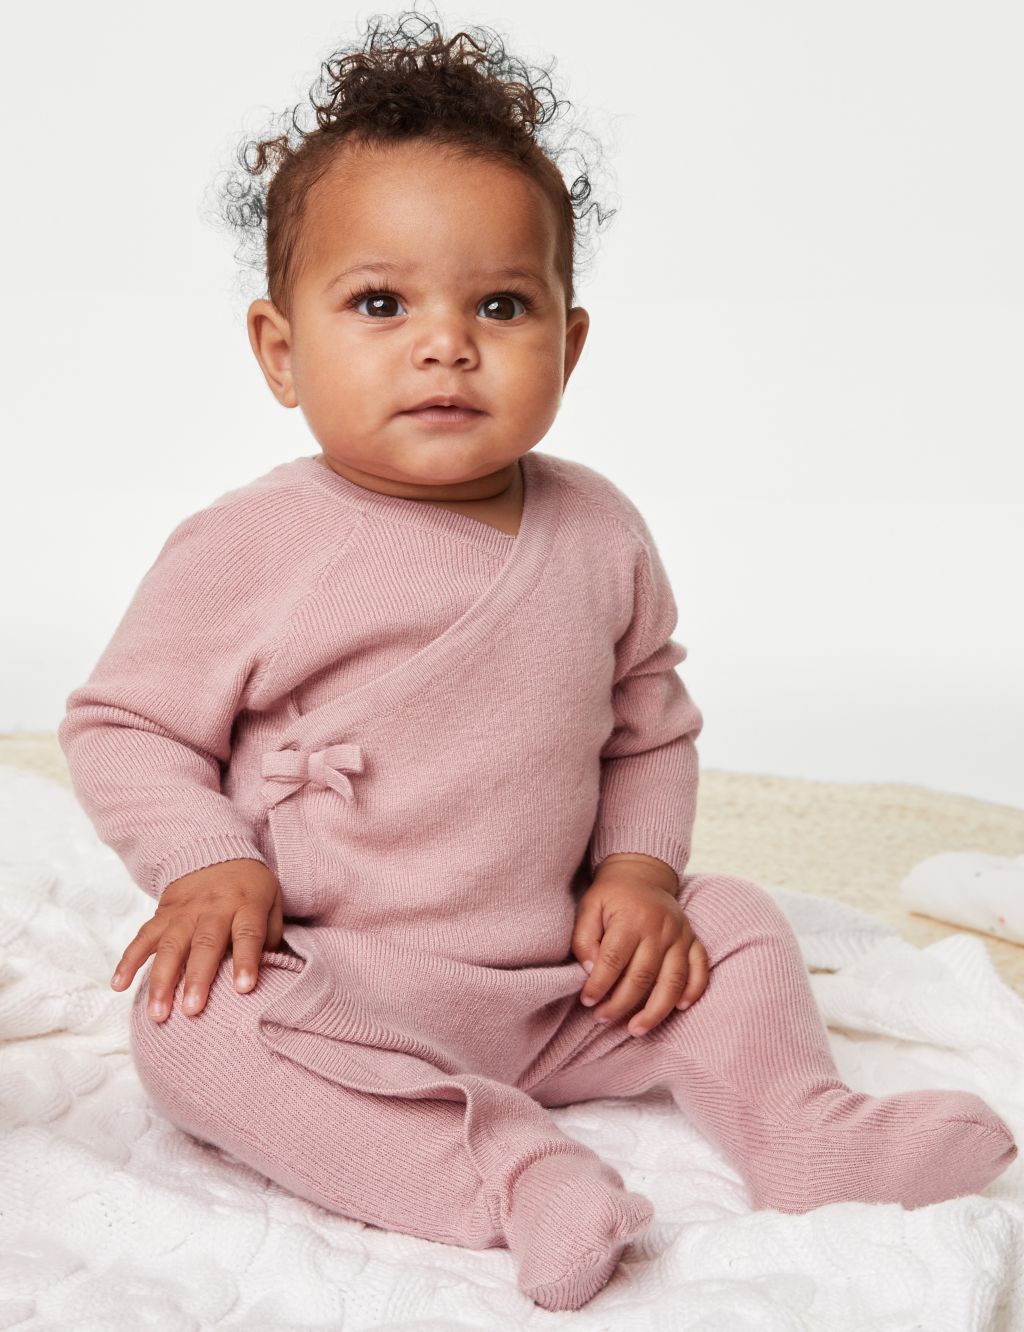 Knitted Sleepsuit (0-1 Yrs) image 1